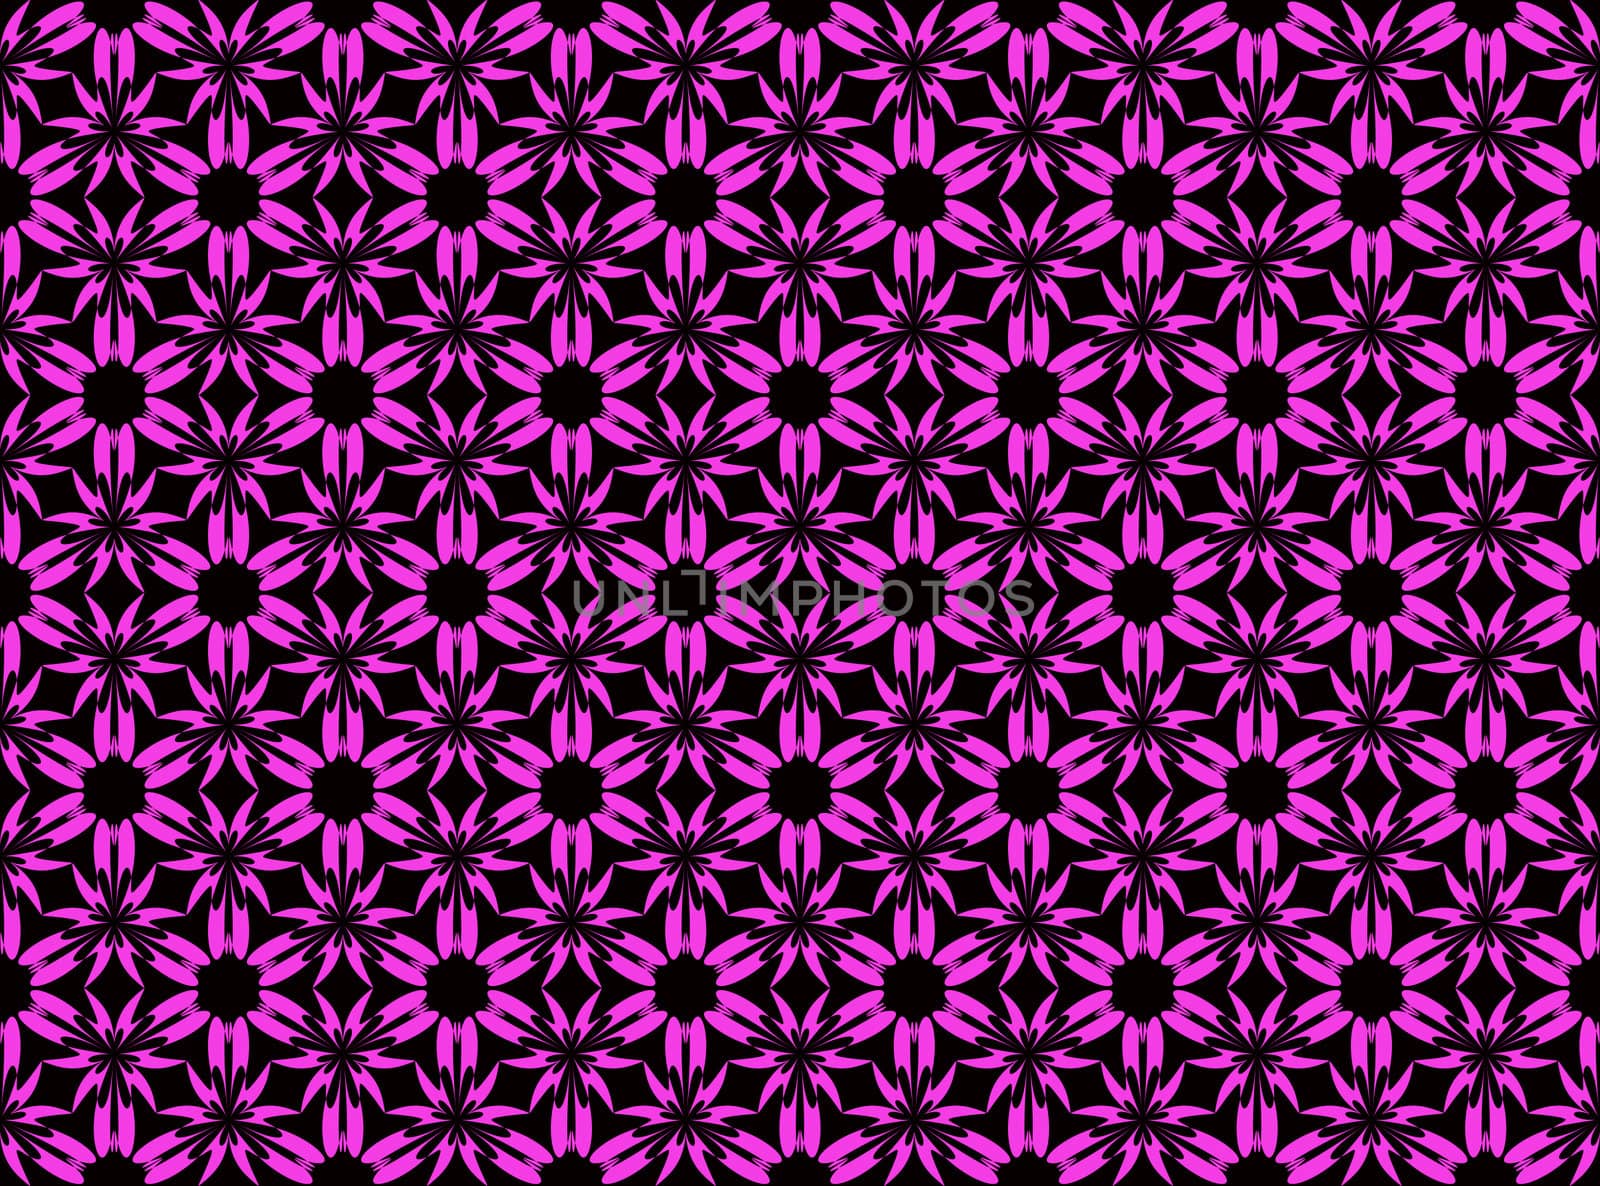 Wallpaper pattern on the black background